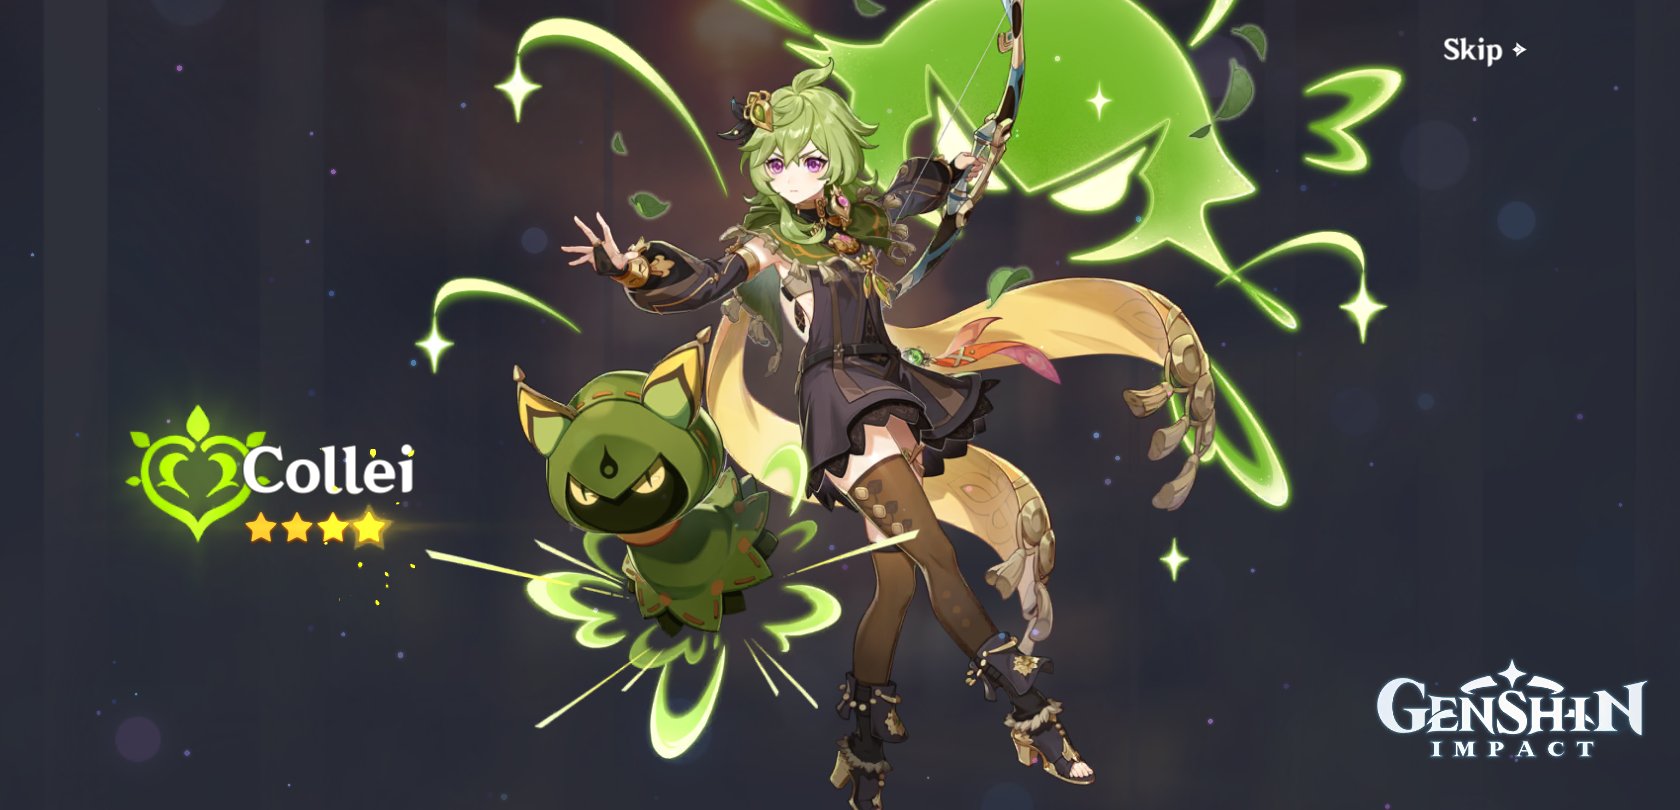 Qing 💜🥧 on Twitter: "Didn't get Tighnari but Collei came home in first 10  pull!! 💚 And now I go touch grass, by grass I mean dendro  https://t.co/gj2sTjXGNm" / Twitter